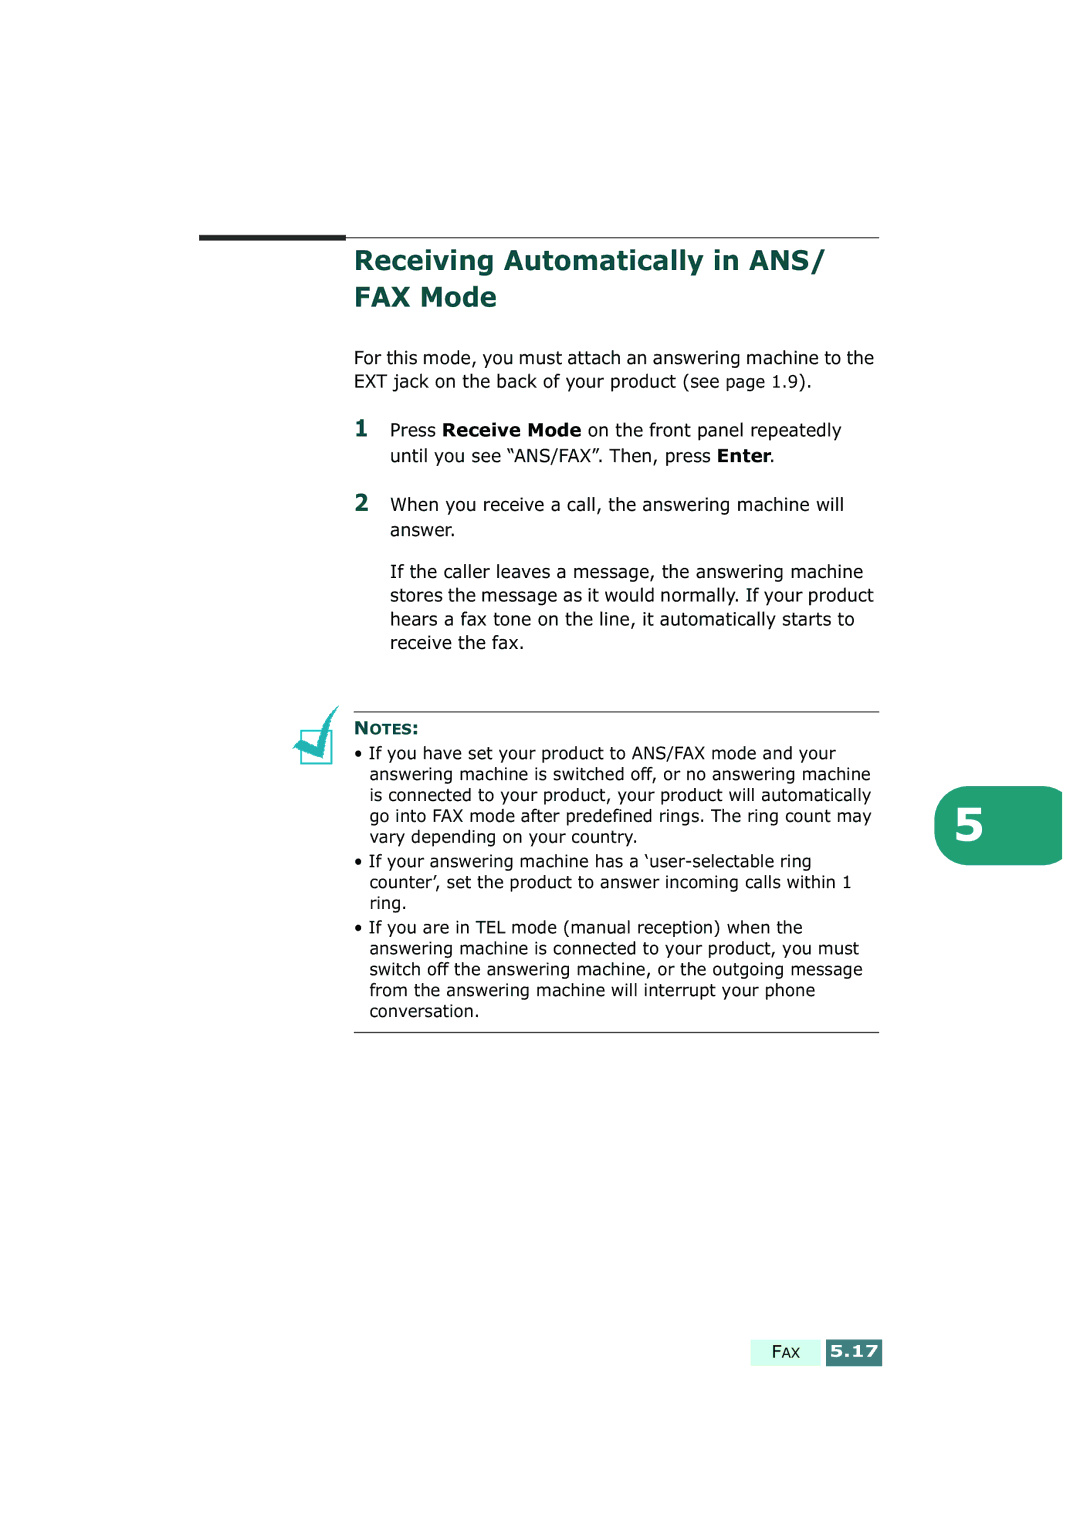 Samsung SF-430 manual Receiving Automatically in ANS FAX Mode 